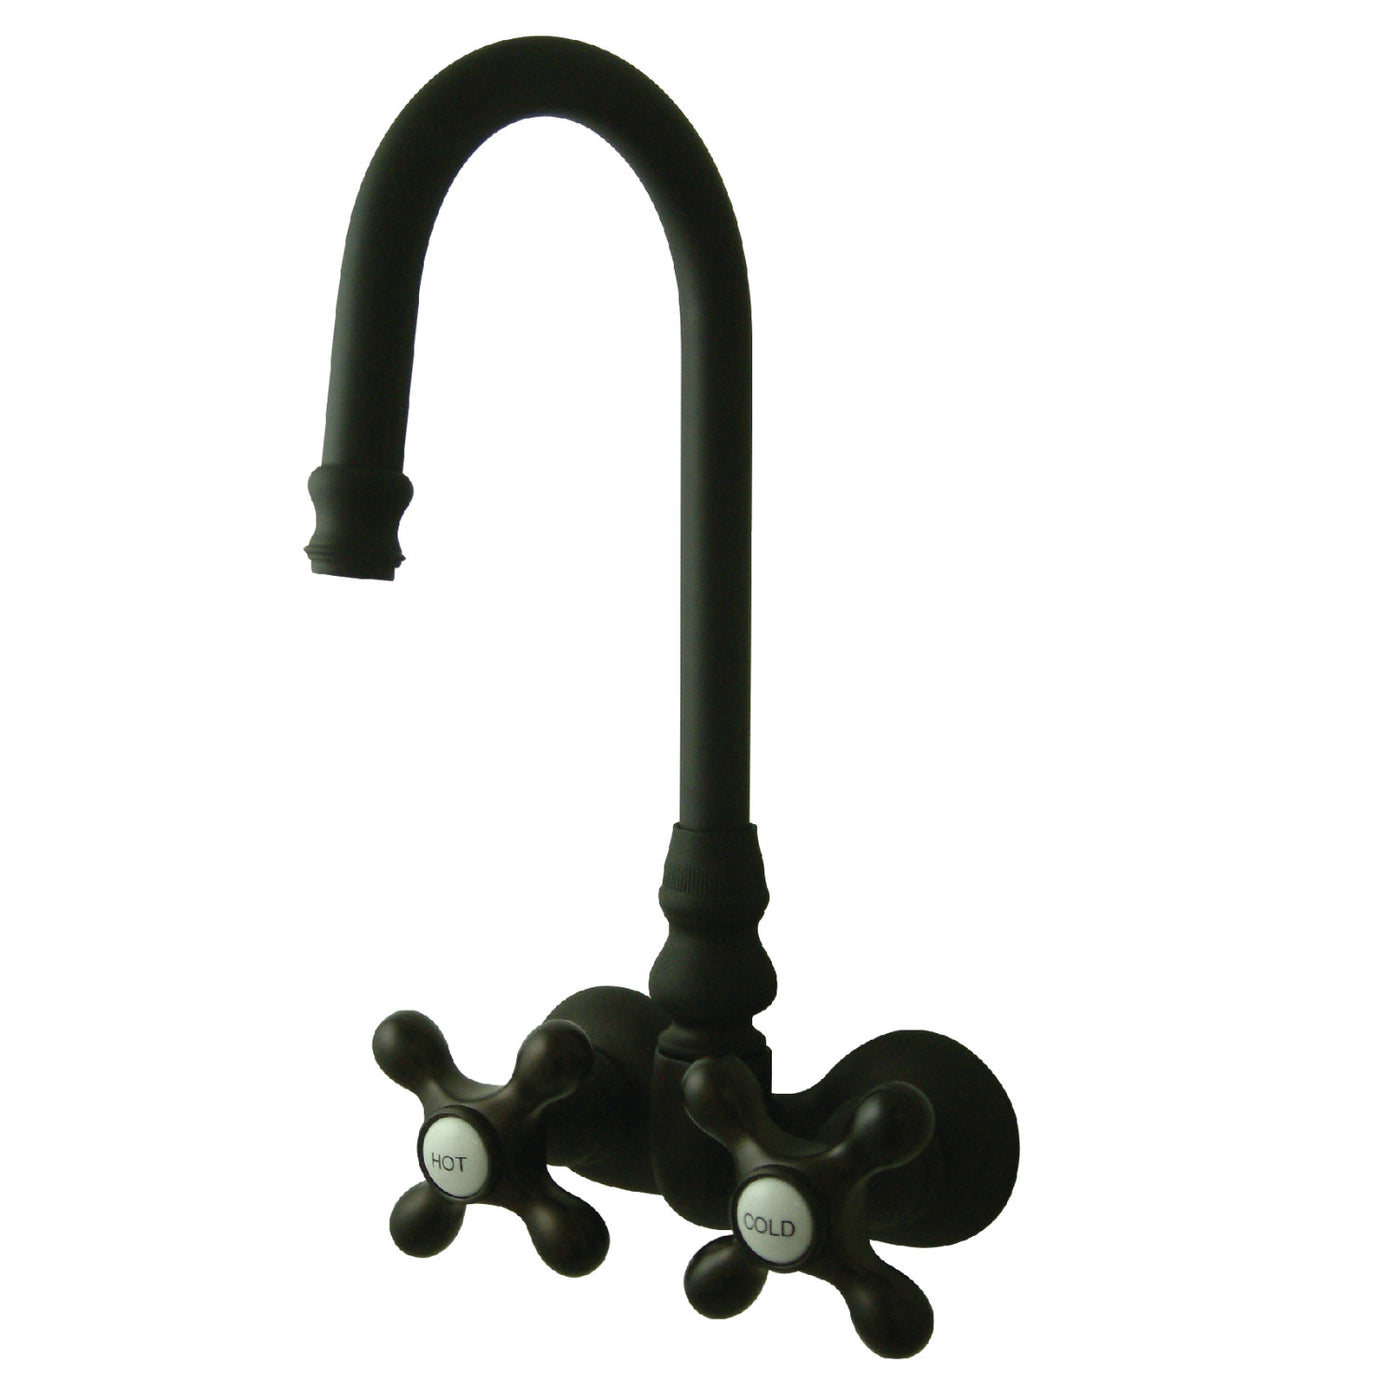 Elements of Design DT0715AX 3-3/8-Inch Wall Mount Tub Faucet, Oil Rubbed Bronze